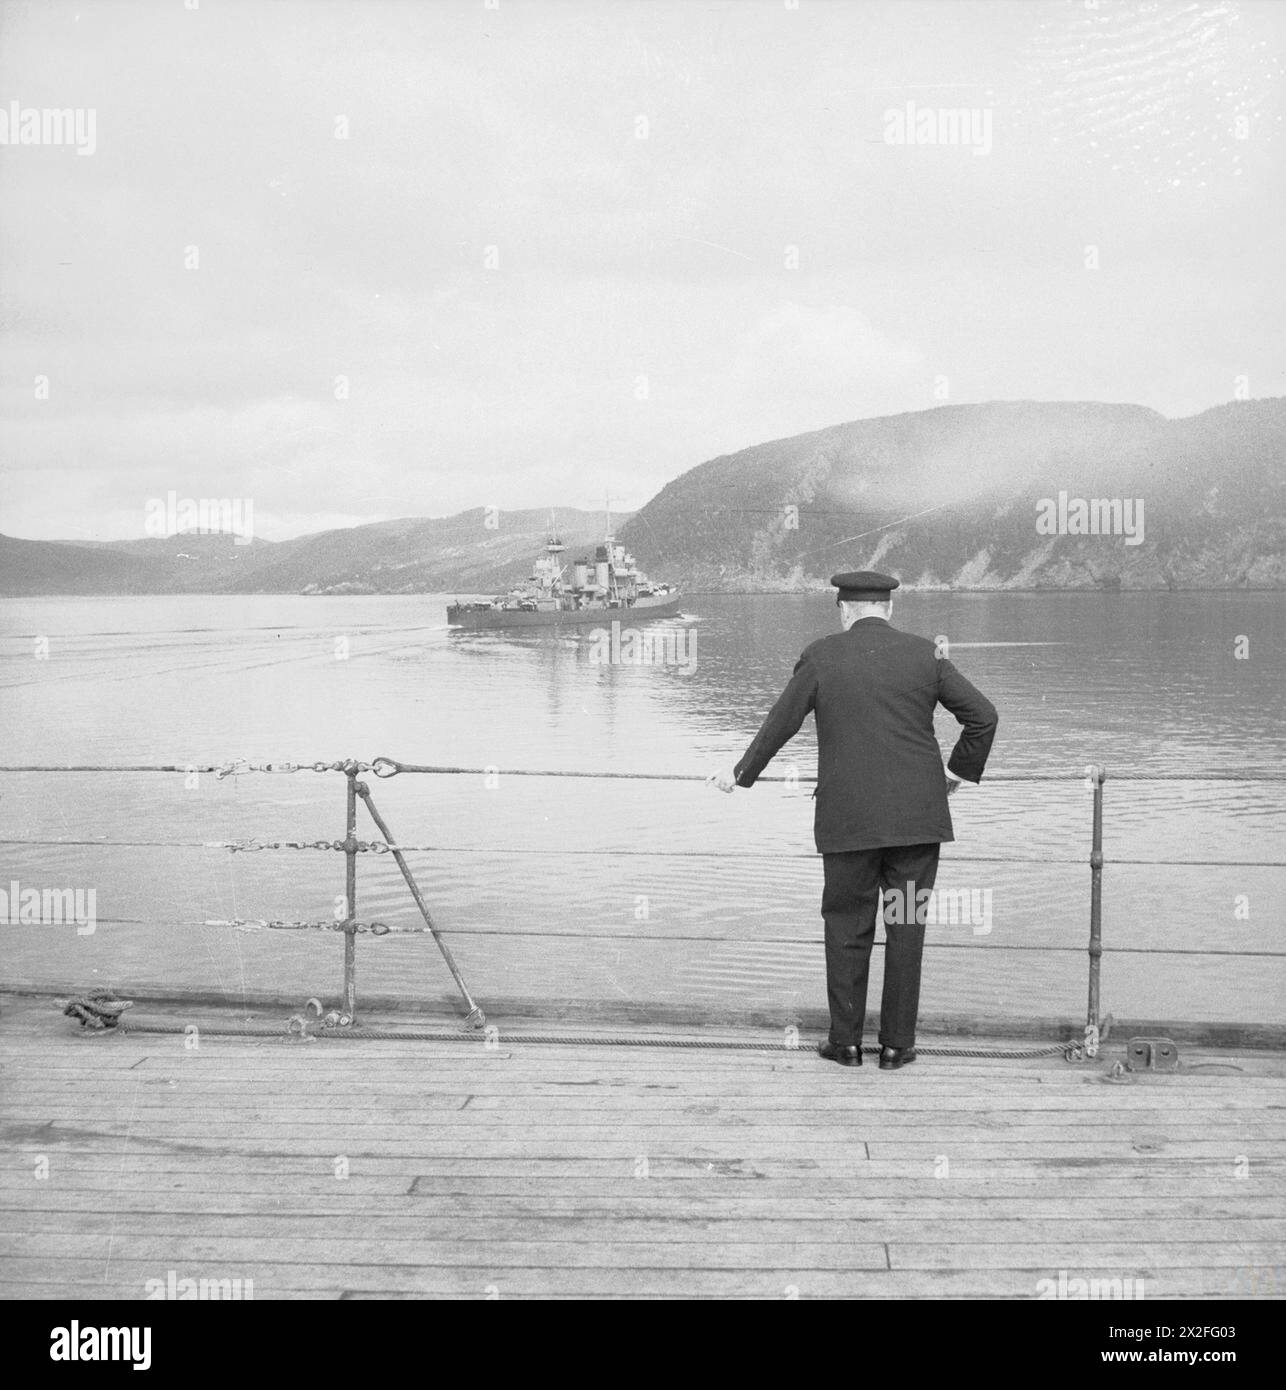 WINSTON CHURCHILL DURING THE SECOND WORLD WAR - The Prime Minister Winston Churchill looks out from the deck of HMS PRINCE OF WALES as USS AUGUSTA sails away following the Atlantic Conference onboard the vessel with US President Franklin D Roosevelt in August 1941 Churchill, Winston Leonard Spencer Stock Photo